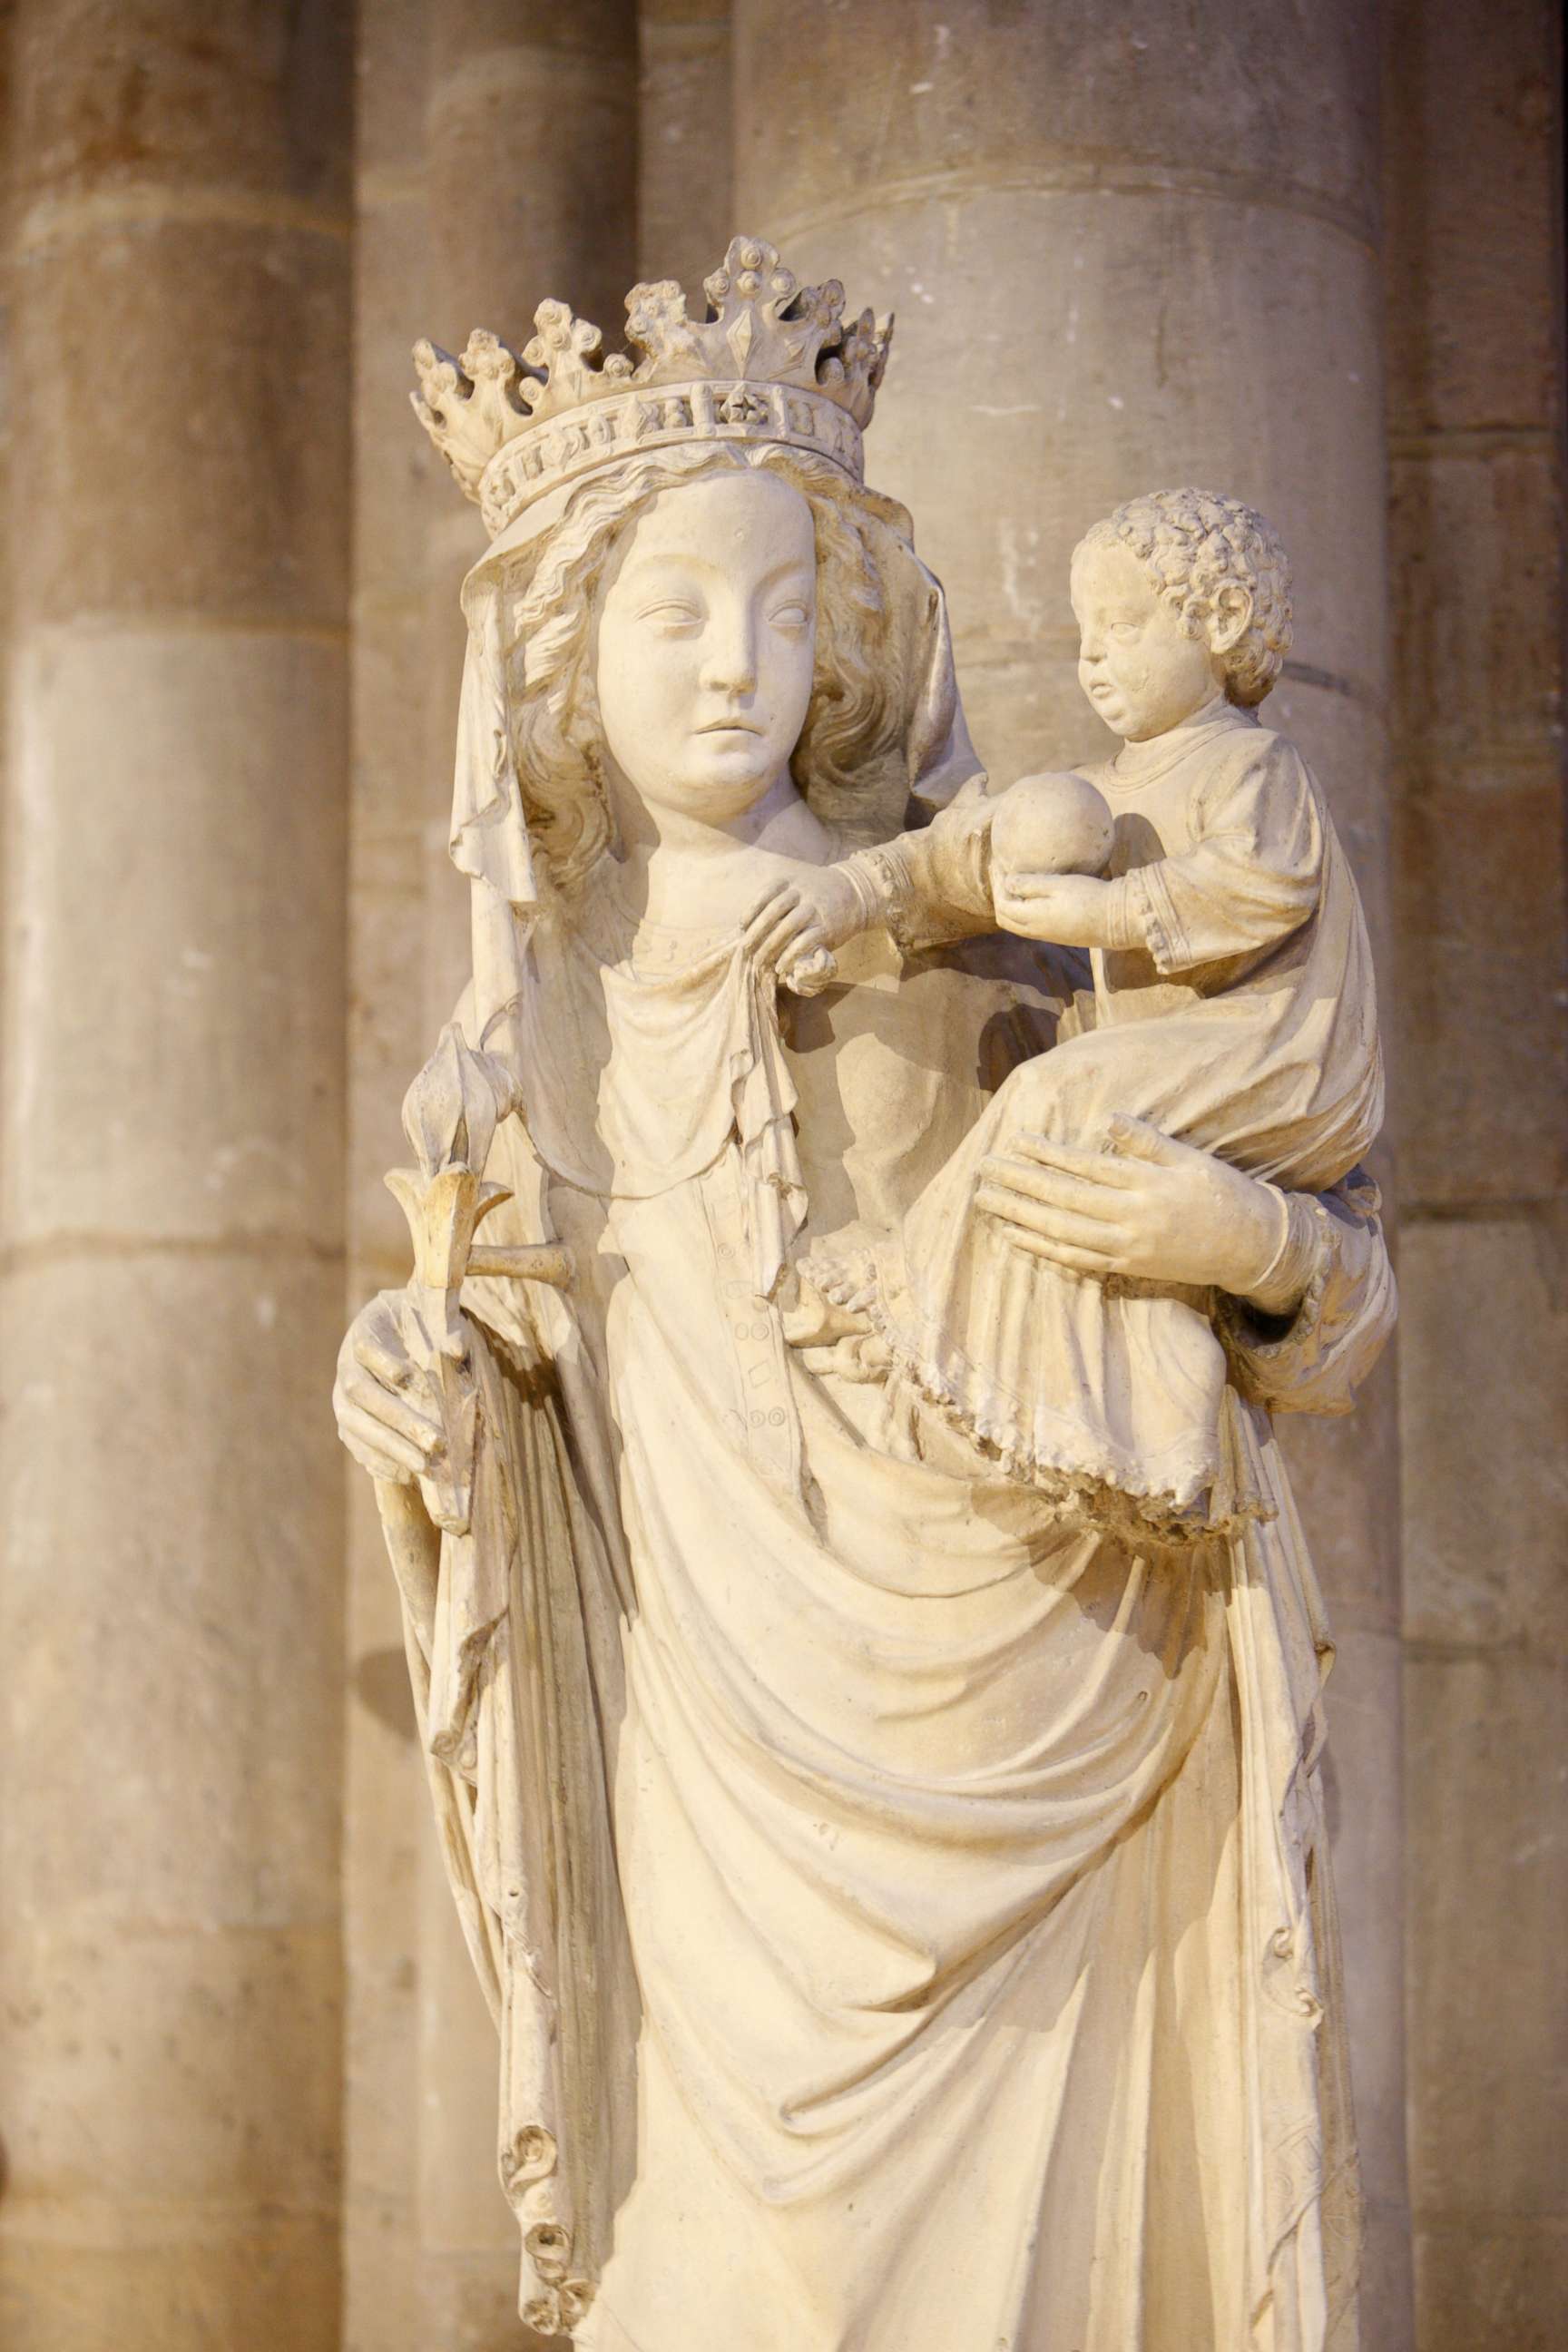 PHOTO: The 14th century Notre Dame de Paris, or Our Lady of Paris, statue is pictured in the Notre Dame Cathedral in Paris, in an undated file photo.